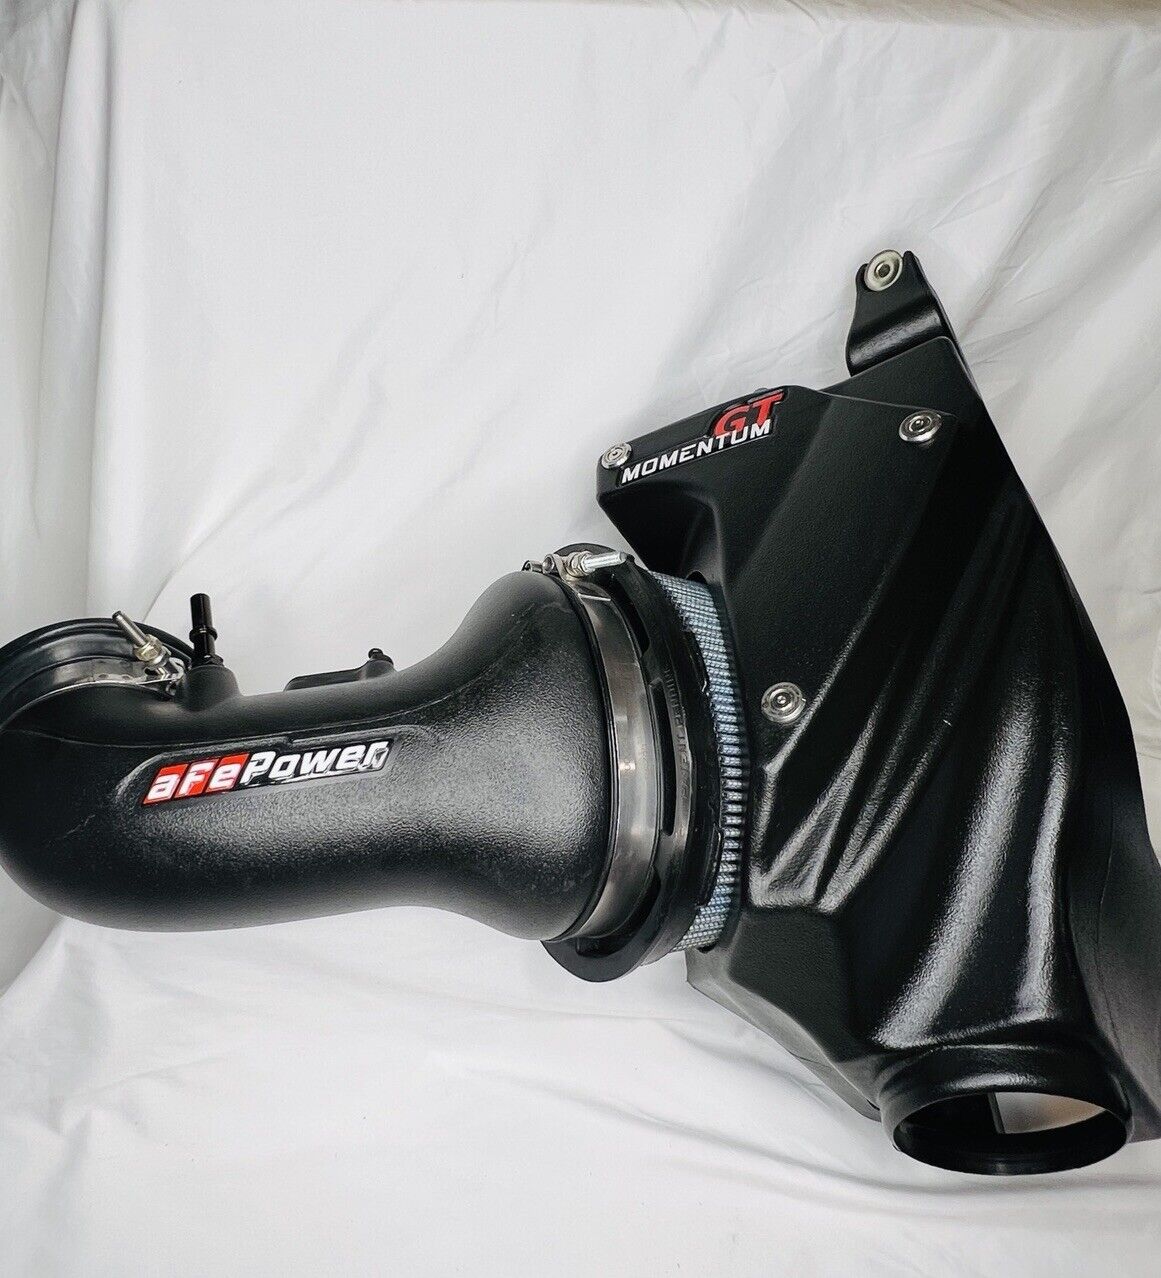 Afe Power Cold Air Intake, GAS, Supercharged fits 09-15 Cadillac CTS-V 6.2L-V8